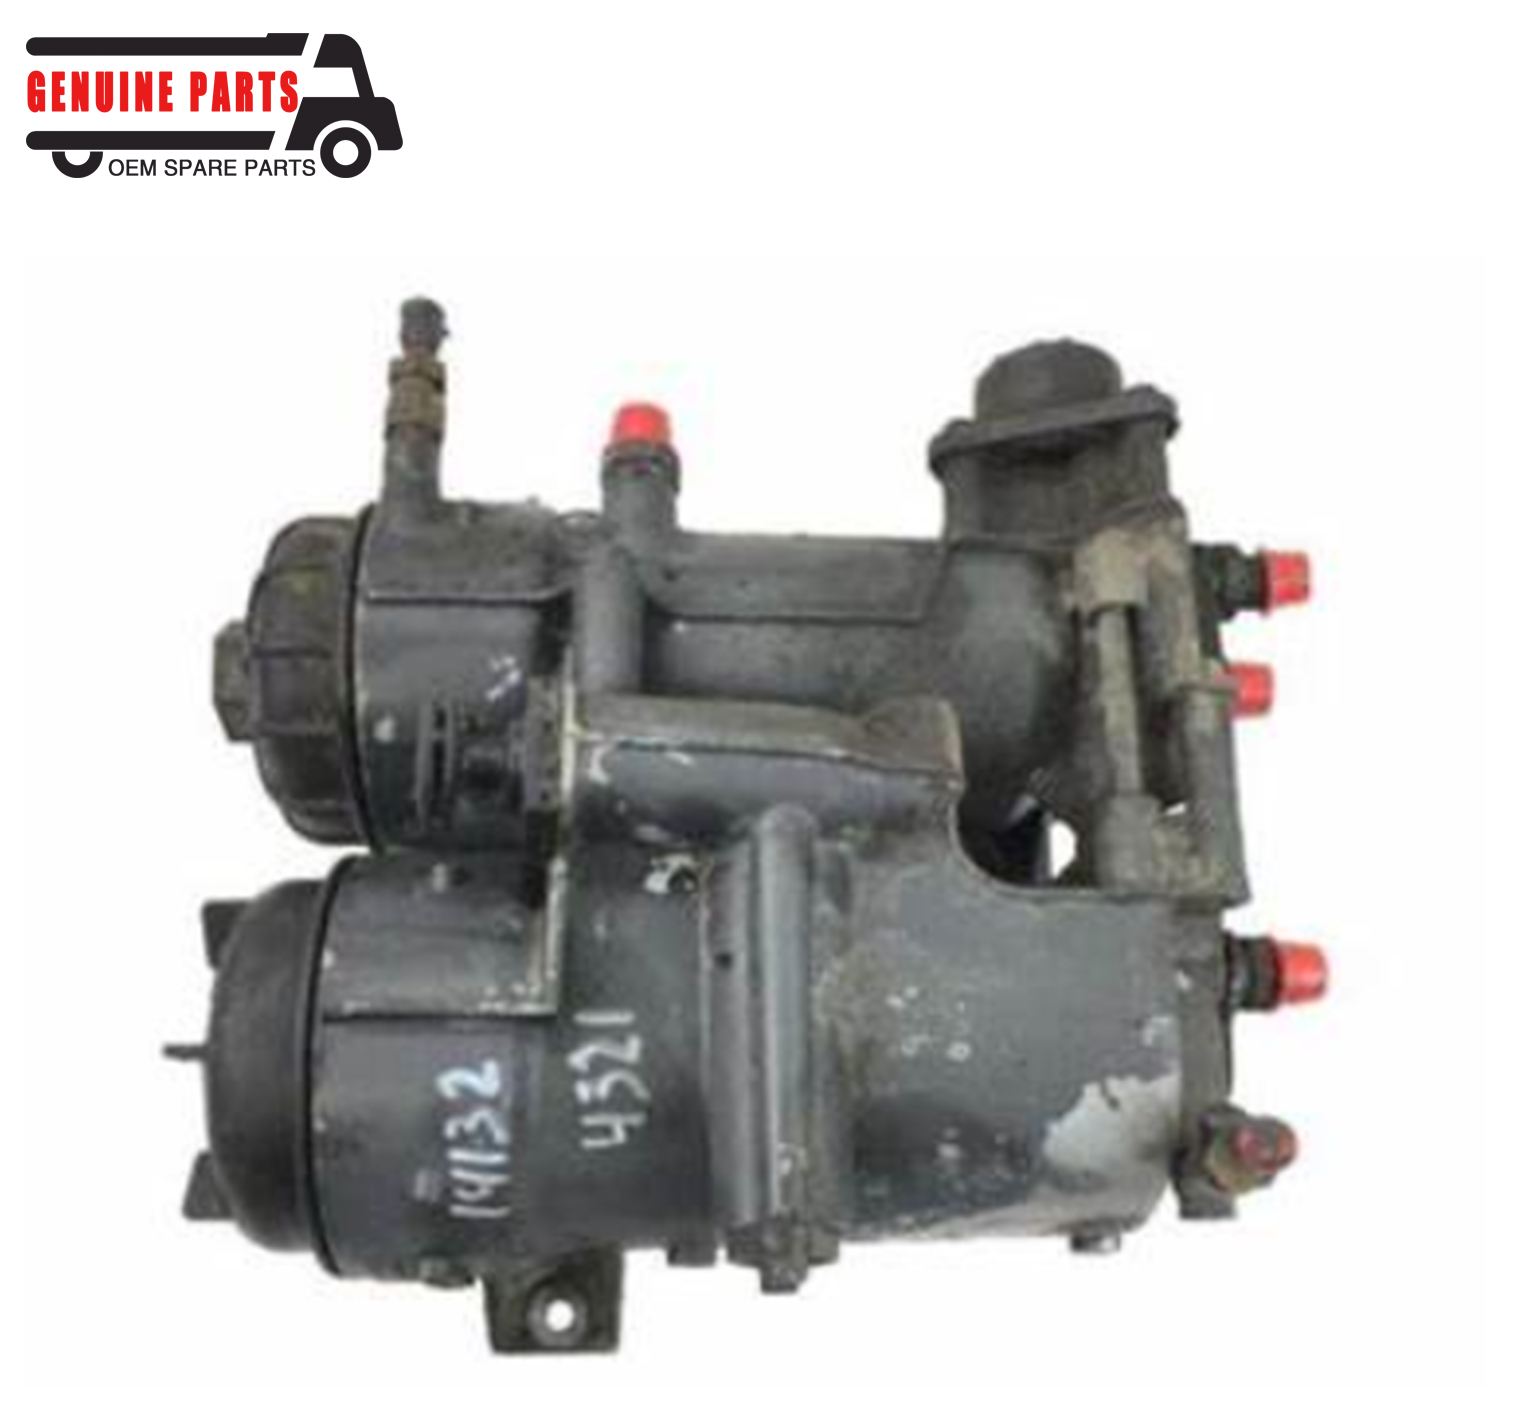 China Guangzhou 2545570 1863220 Used Fuel Filter Housing for SCAN Truck Used Housing